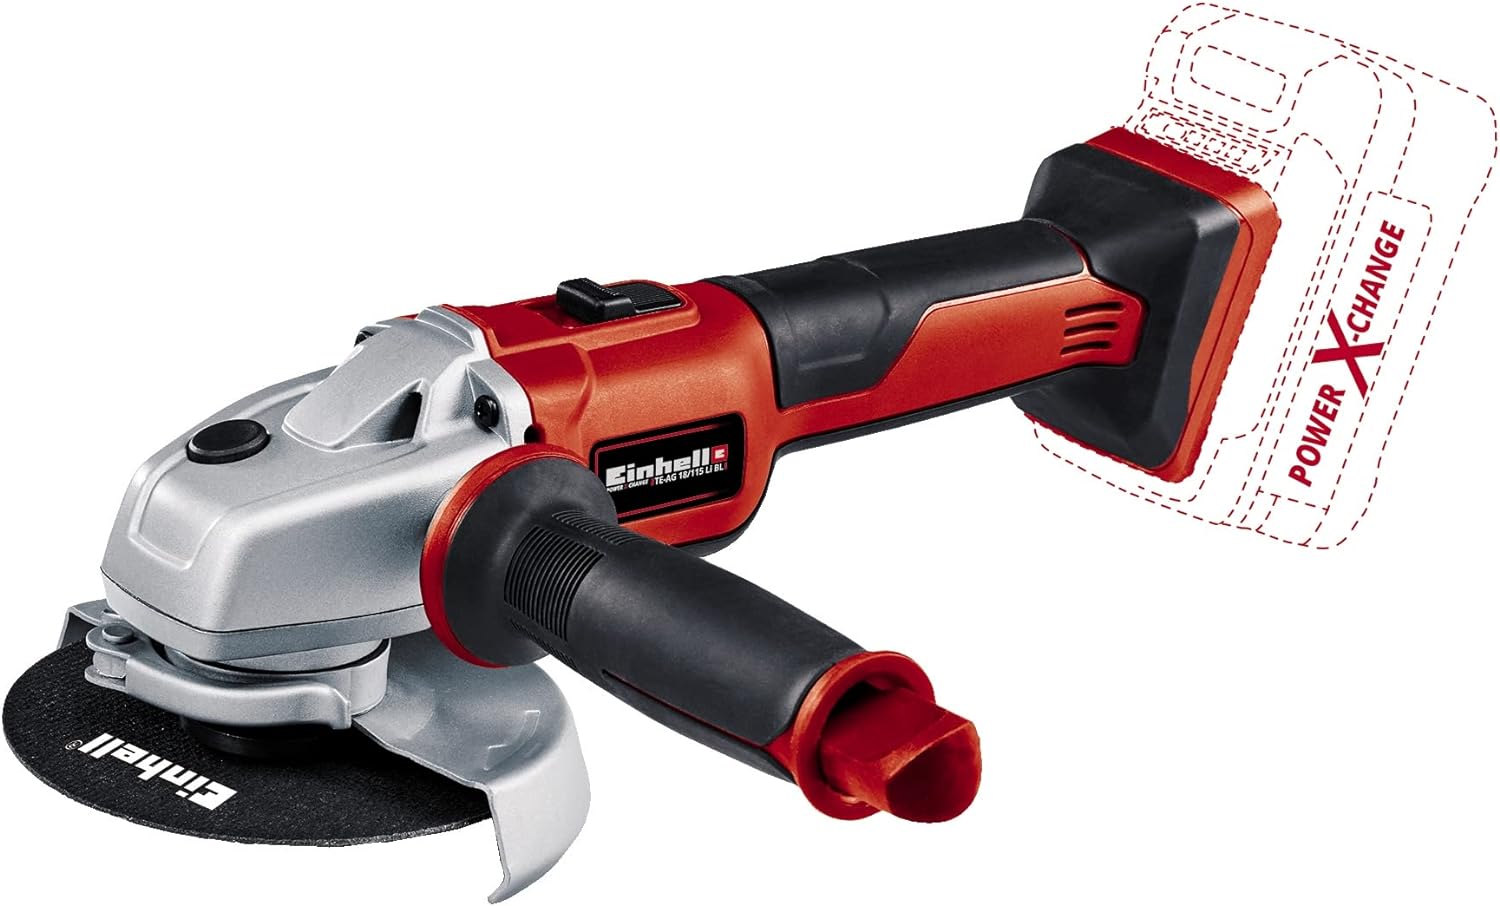 Einhell Power X-Change Brushless 115mm (4 Inch) Cordless Angle Grinder - 18V Disc Battery Grinder For Cutting, Grinding And Polishing - AXXIO 18/115 Solo Power Tool (Battery Not Included)